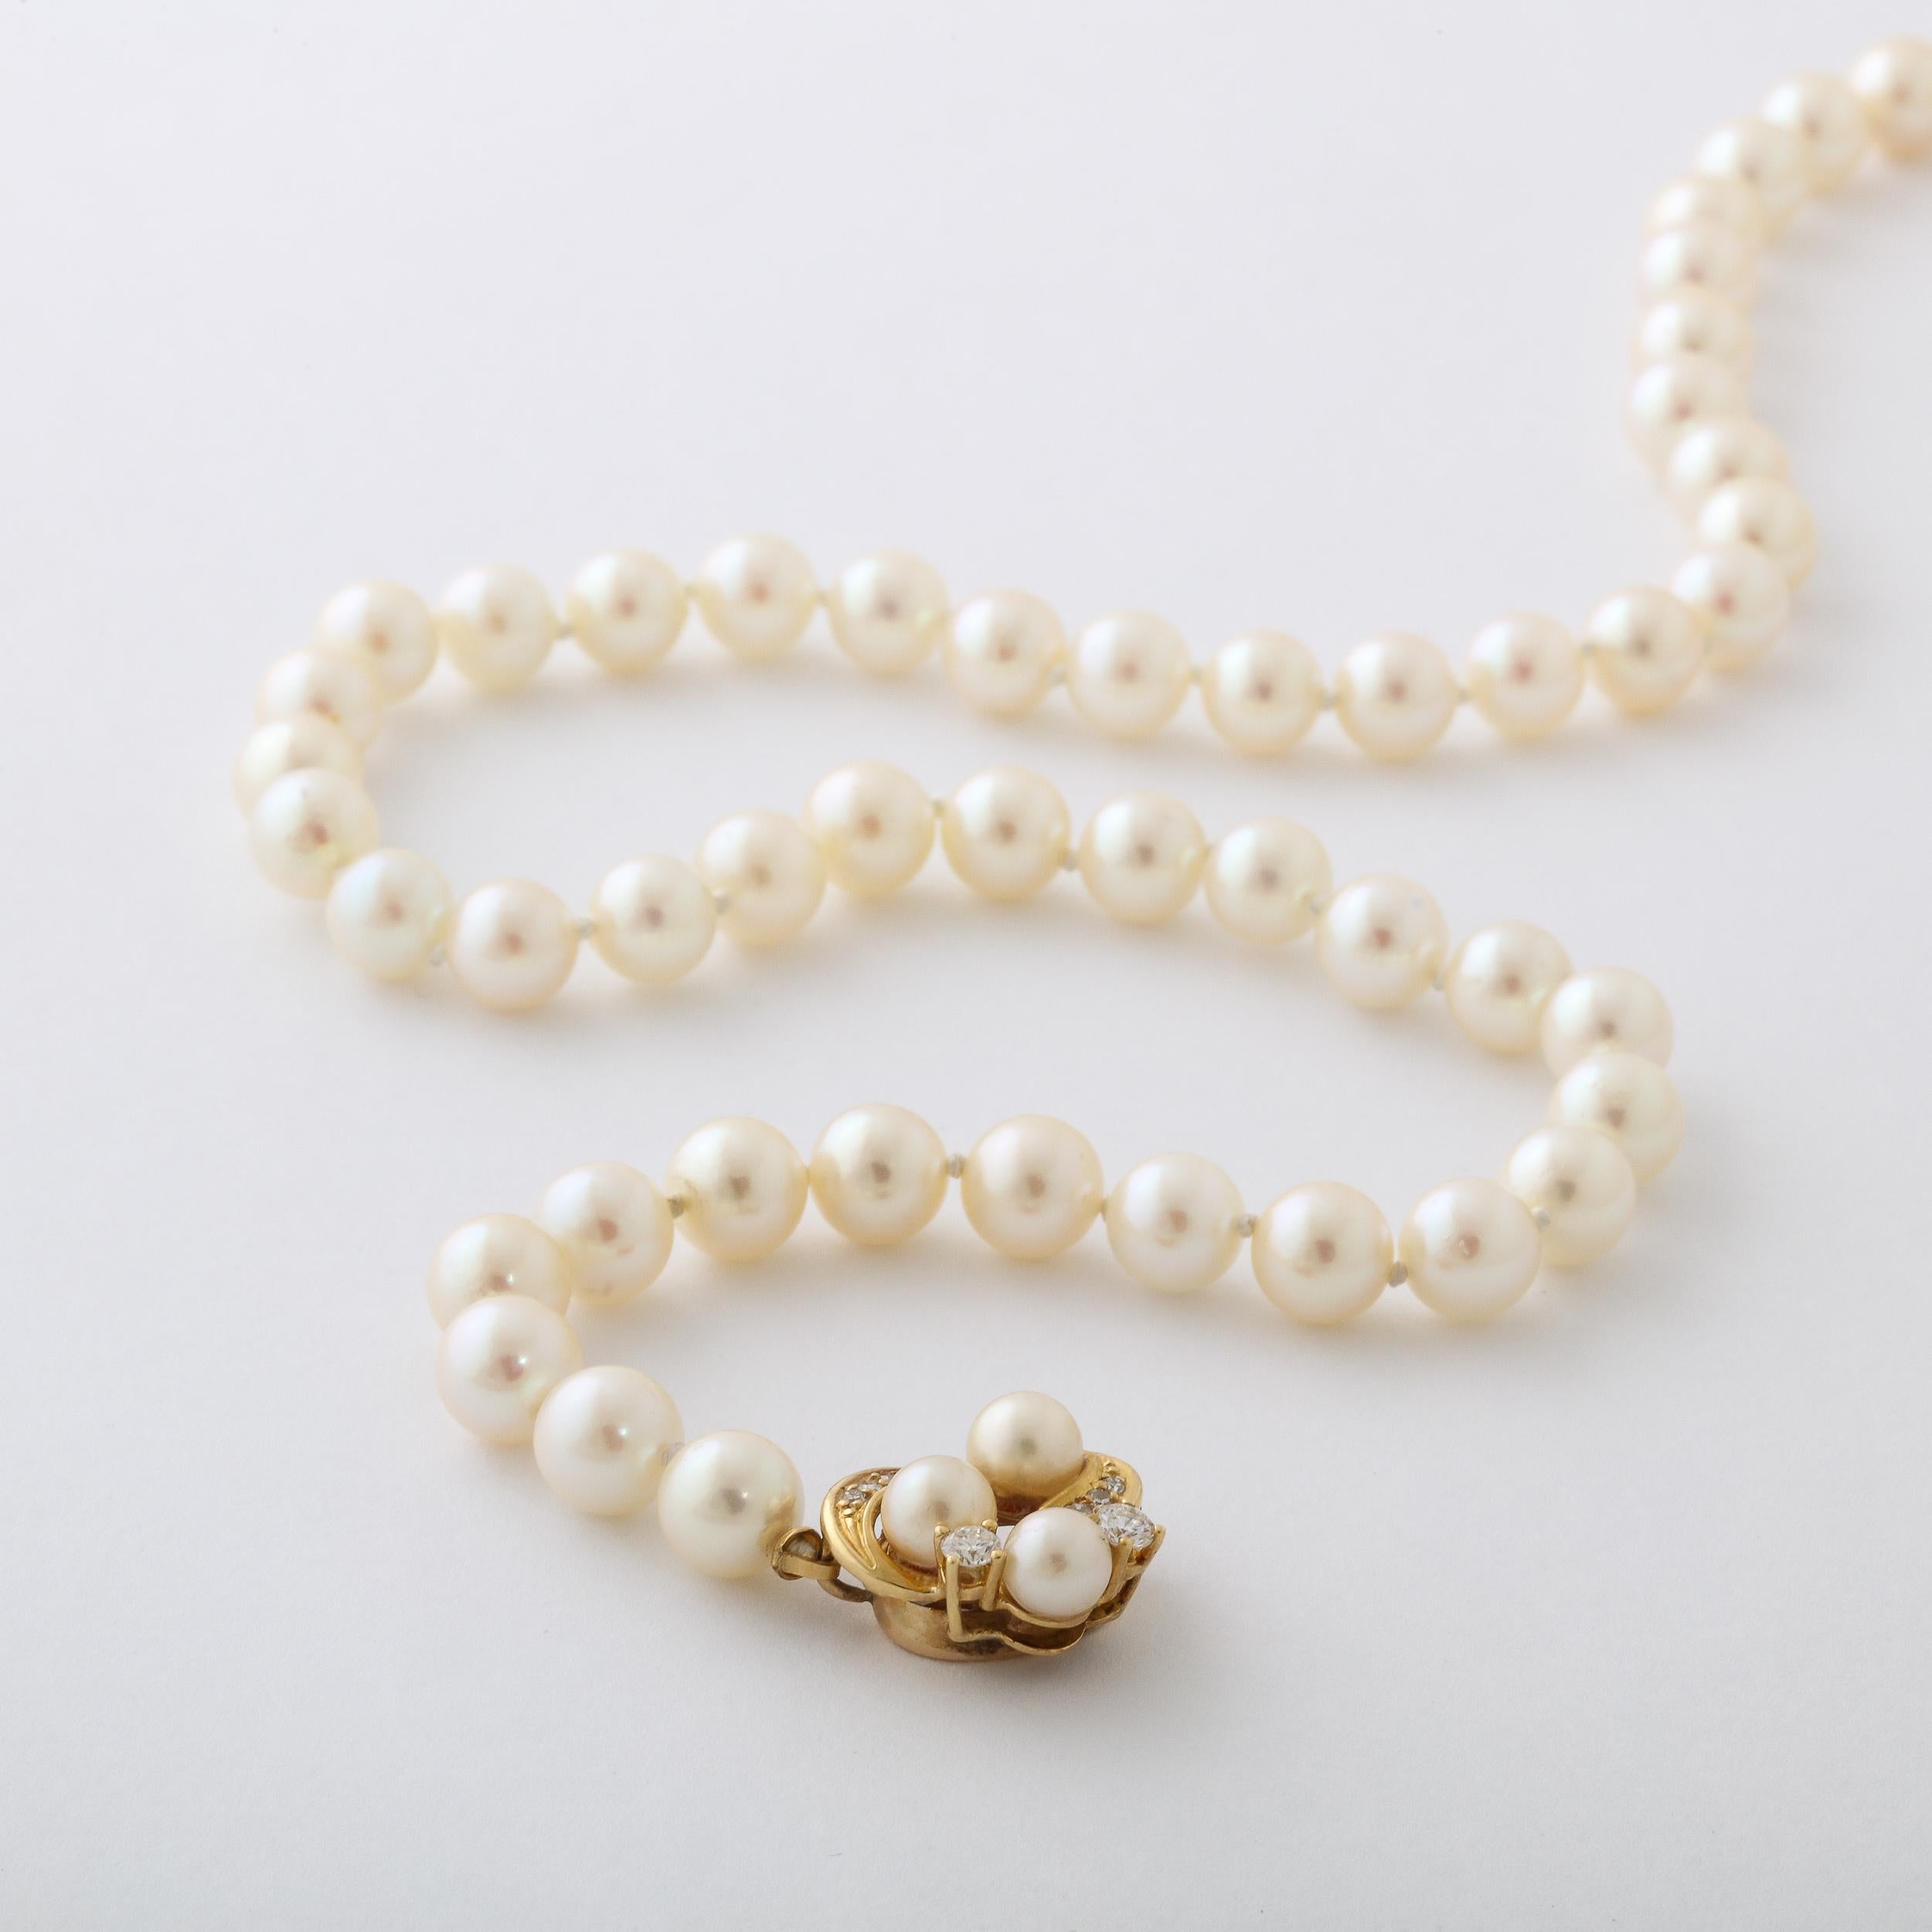 Modernist Pearl Necklace with 14k  Gold , Diamond and Pearl Clasp  10